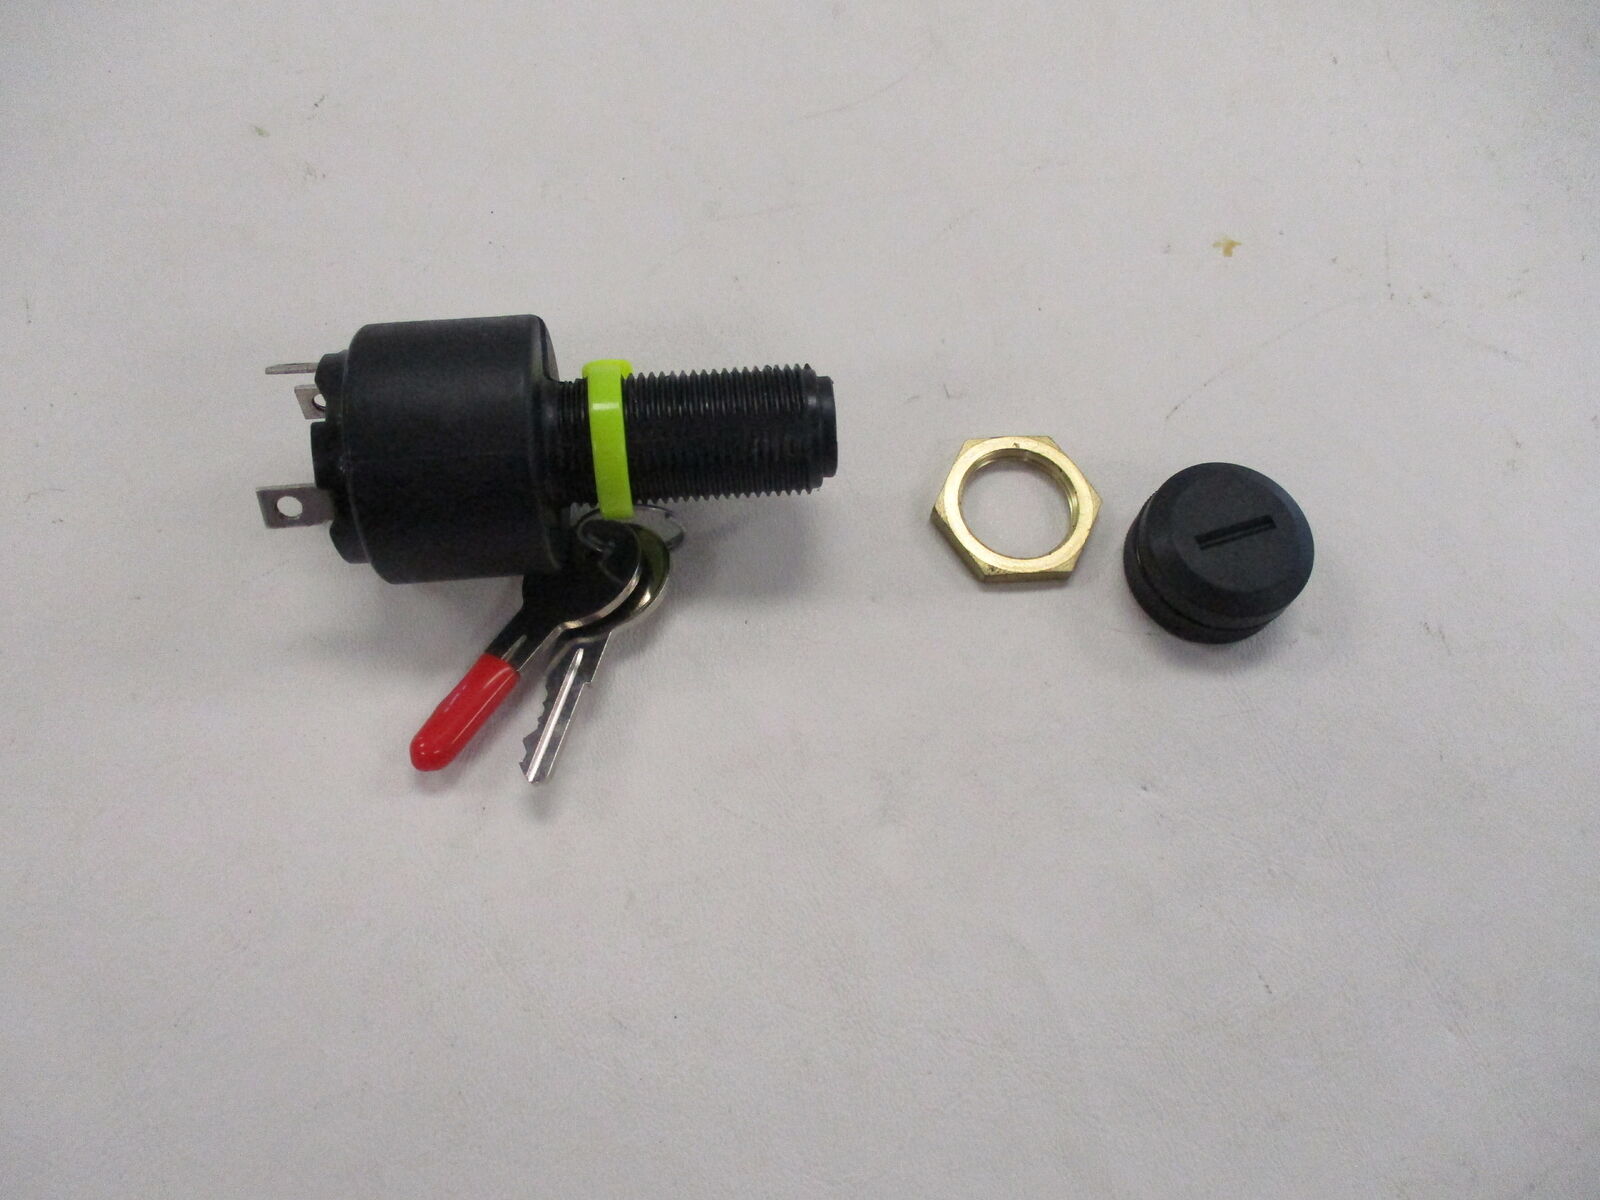 3 POSITION IGNITION SWITCH BLACK 1090396 MARINE BOAT